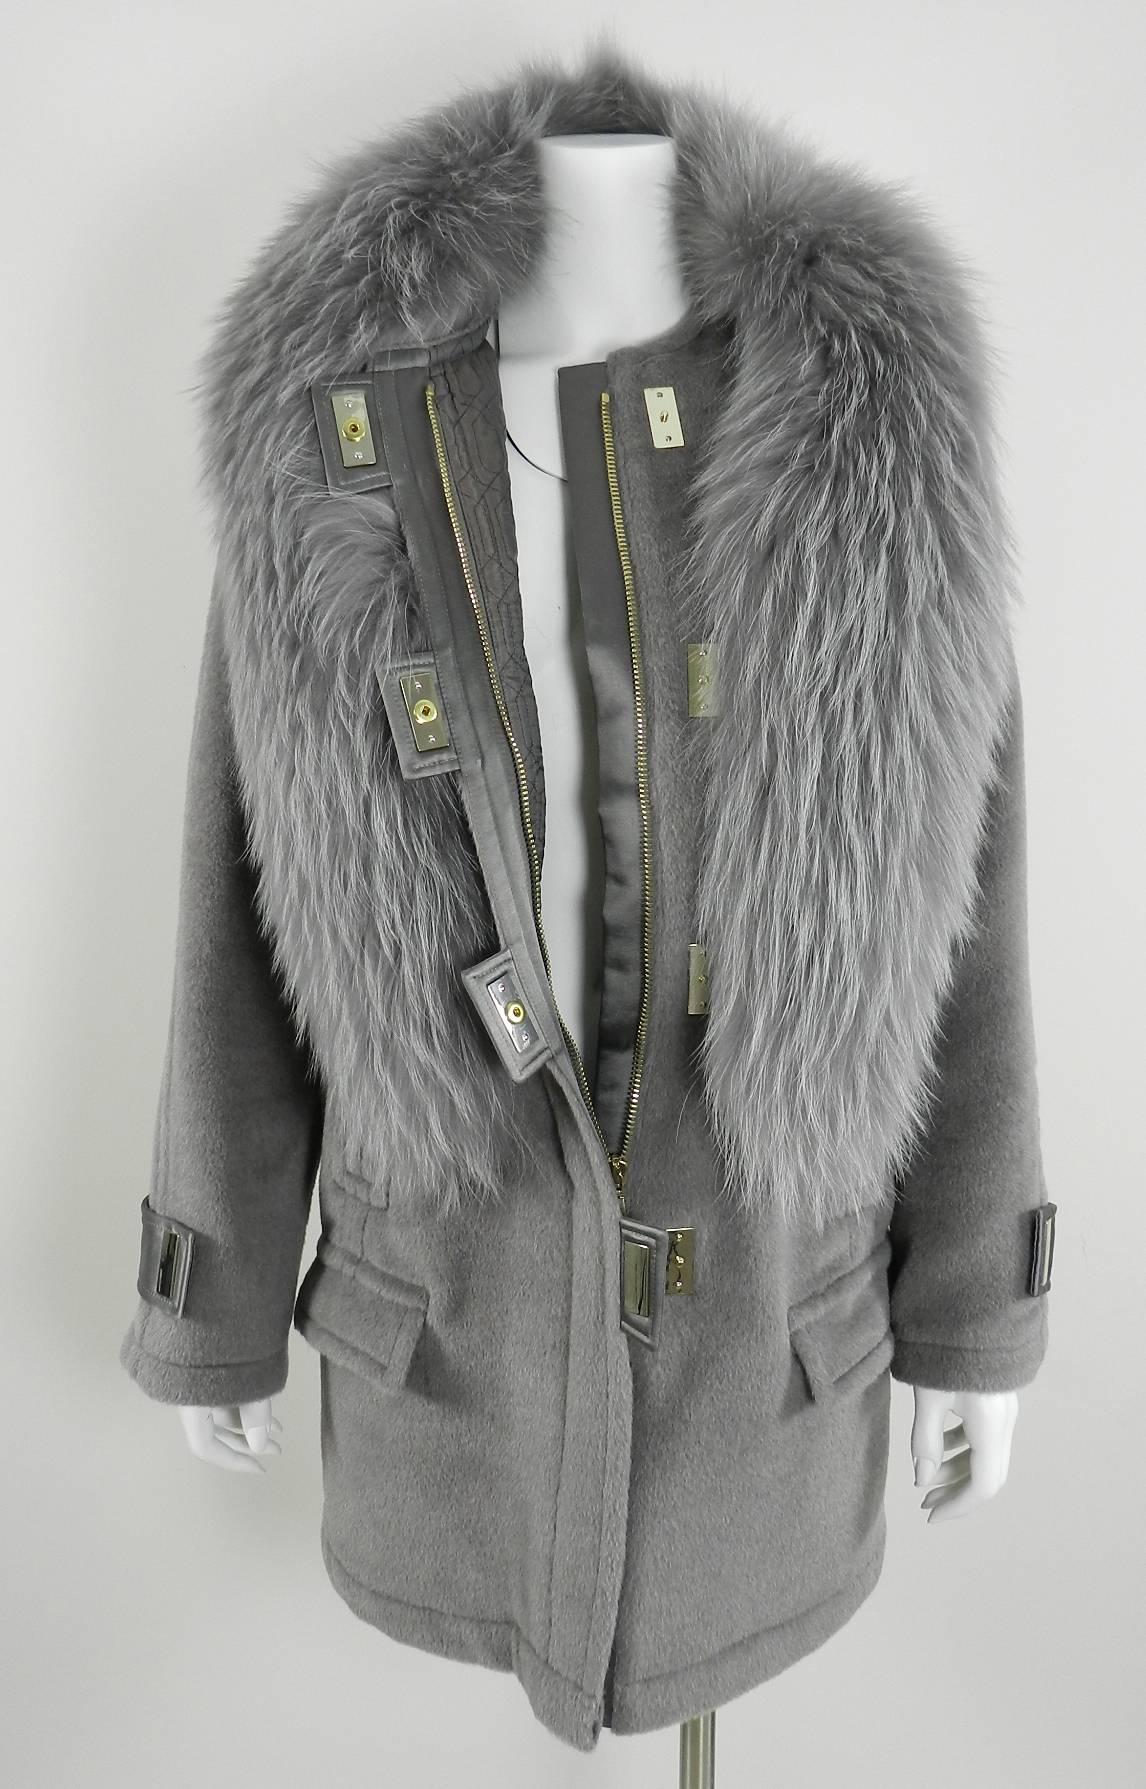 Jason Wu Fall 2014 runway coat. Grey soft wool with fur collar trim. Light champagne goldtone metal plate snaps and zippers. Original retail price $6125+.  Excellent condition - worn once. Size USA 6/8.  Fur is labelled as Dyed Asiatic Raccoon.